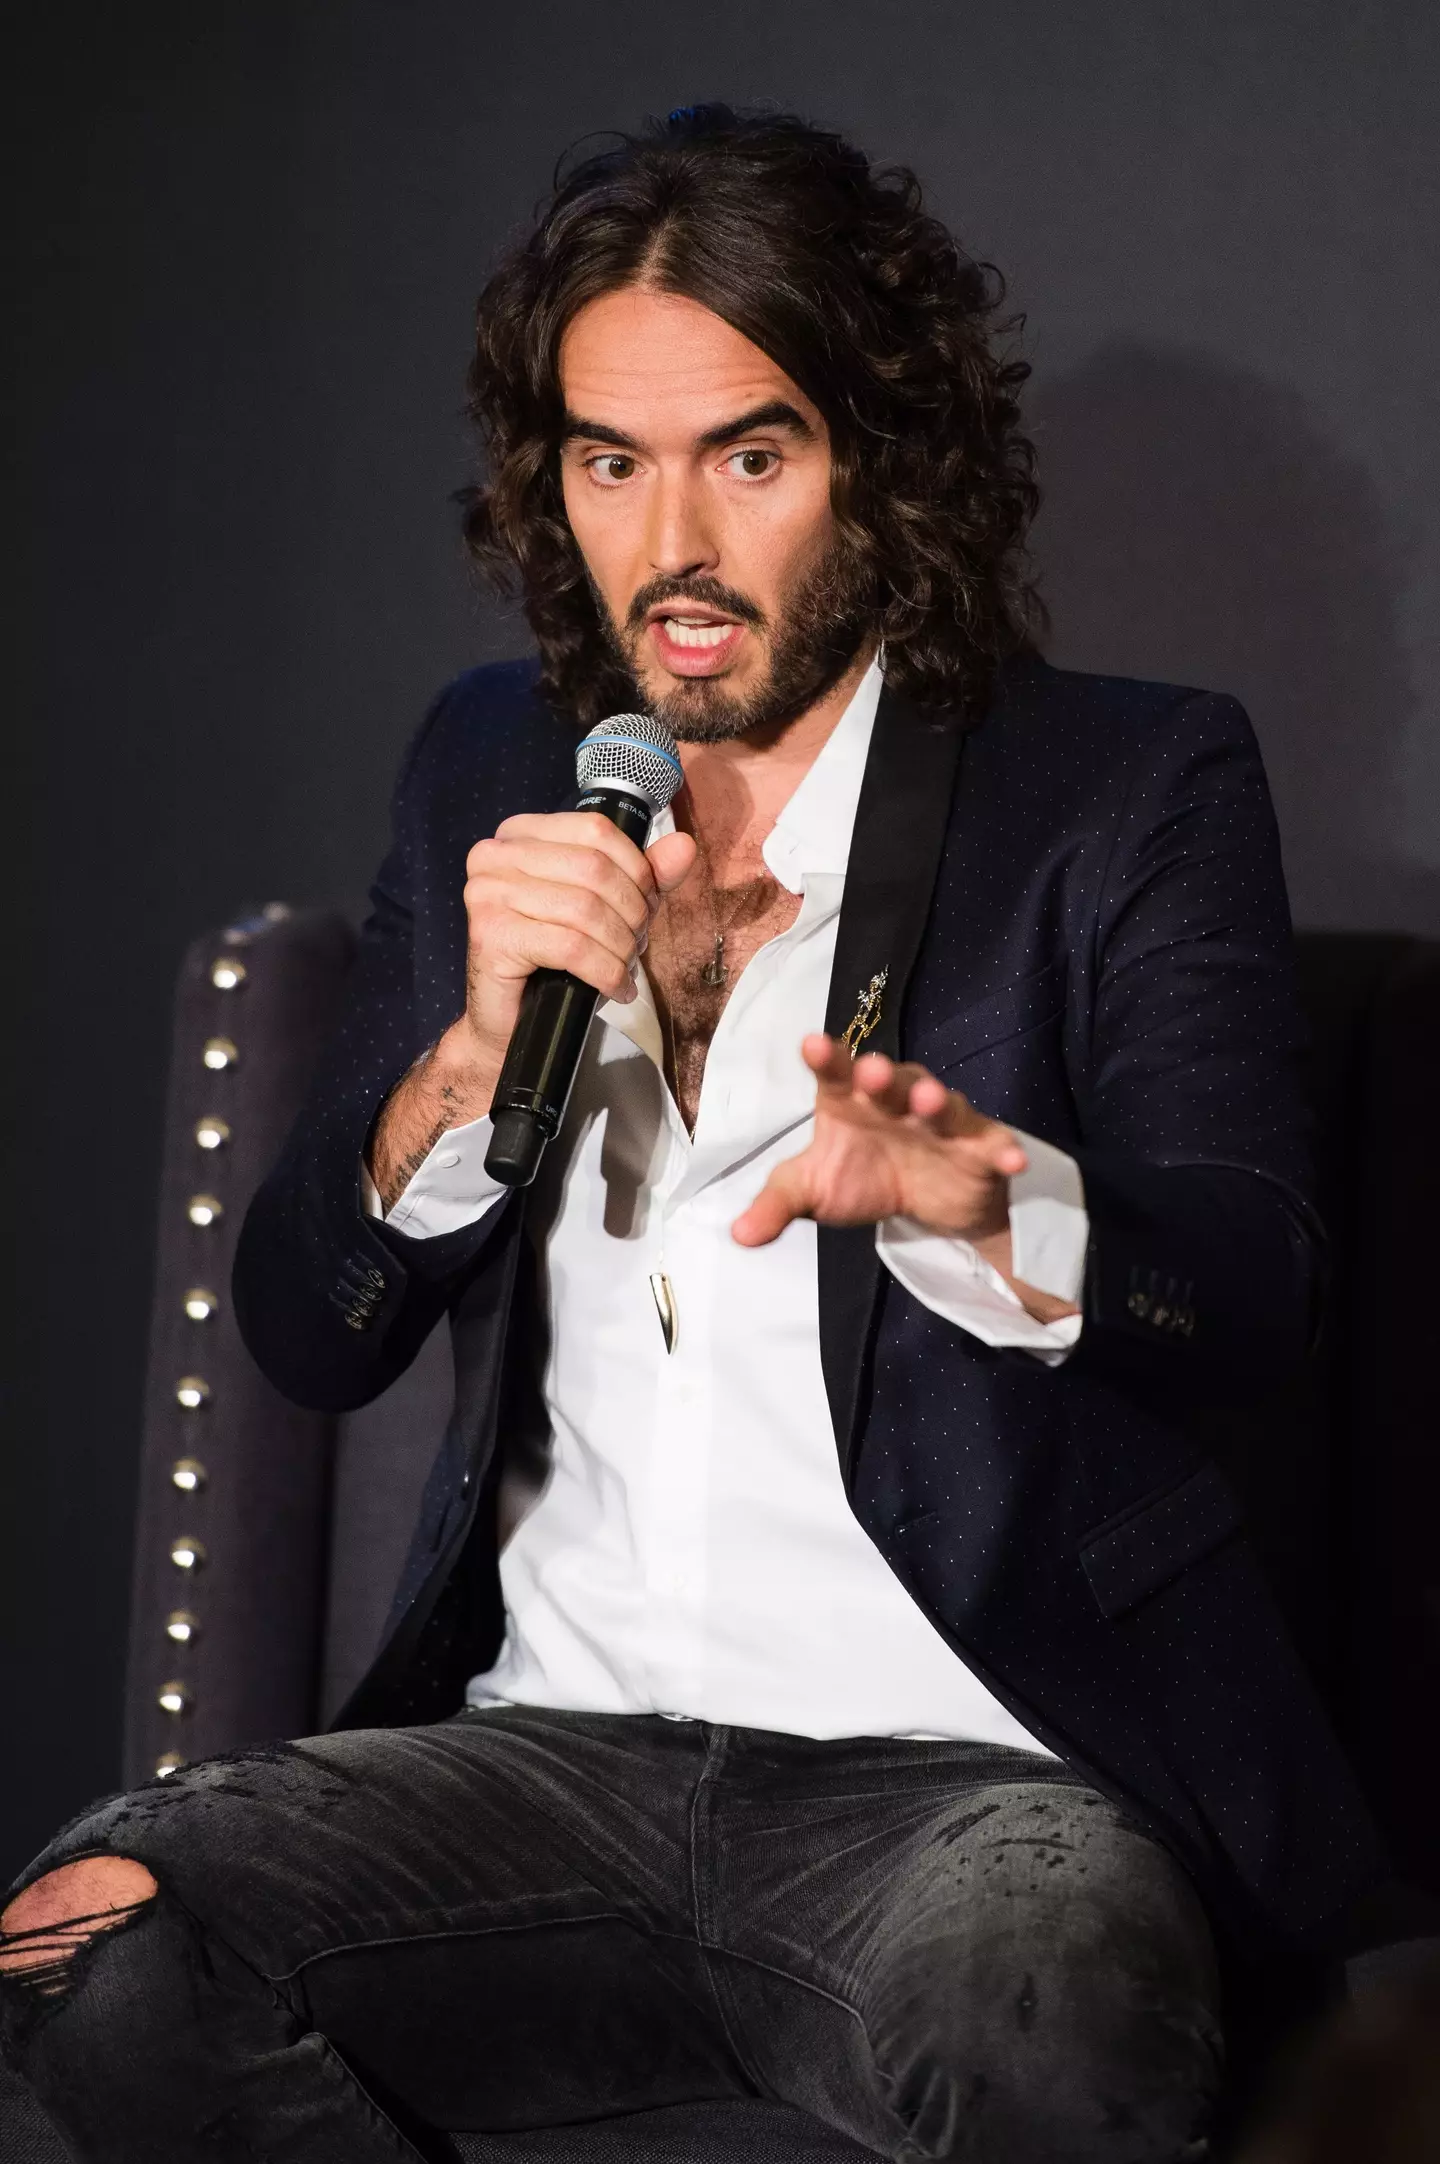 Russell Brand is facing sexual assault accusations.